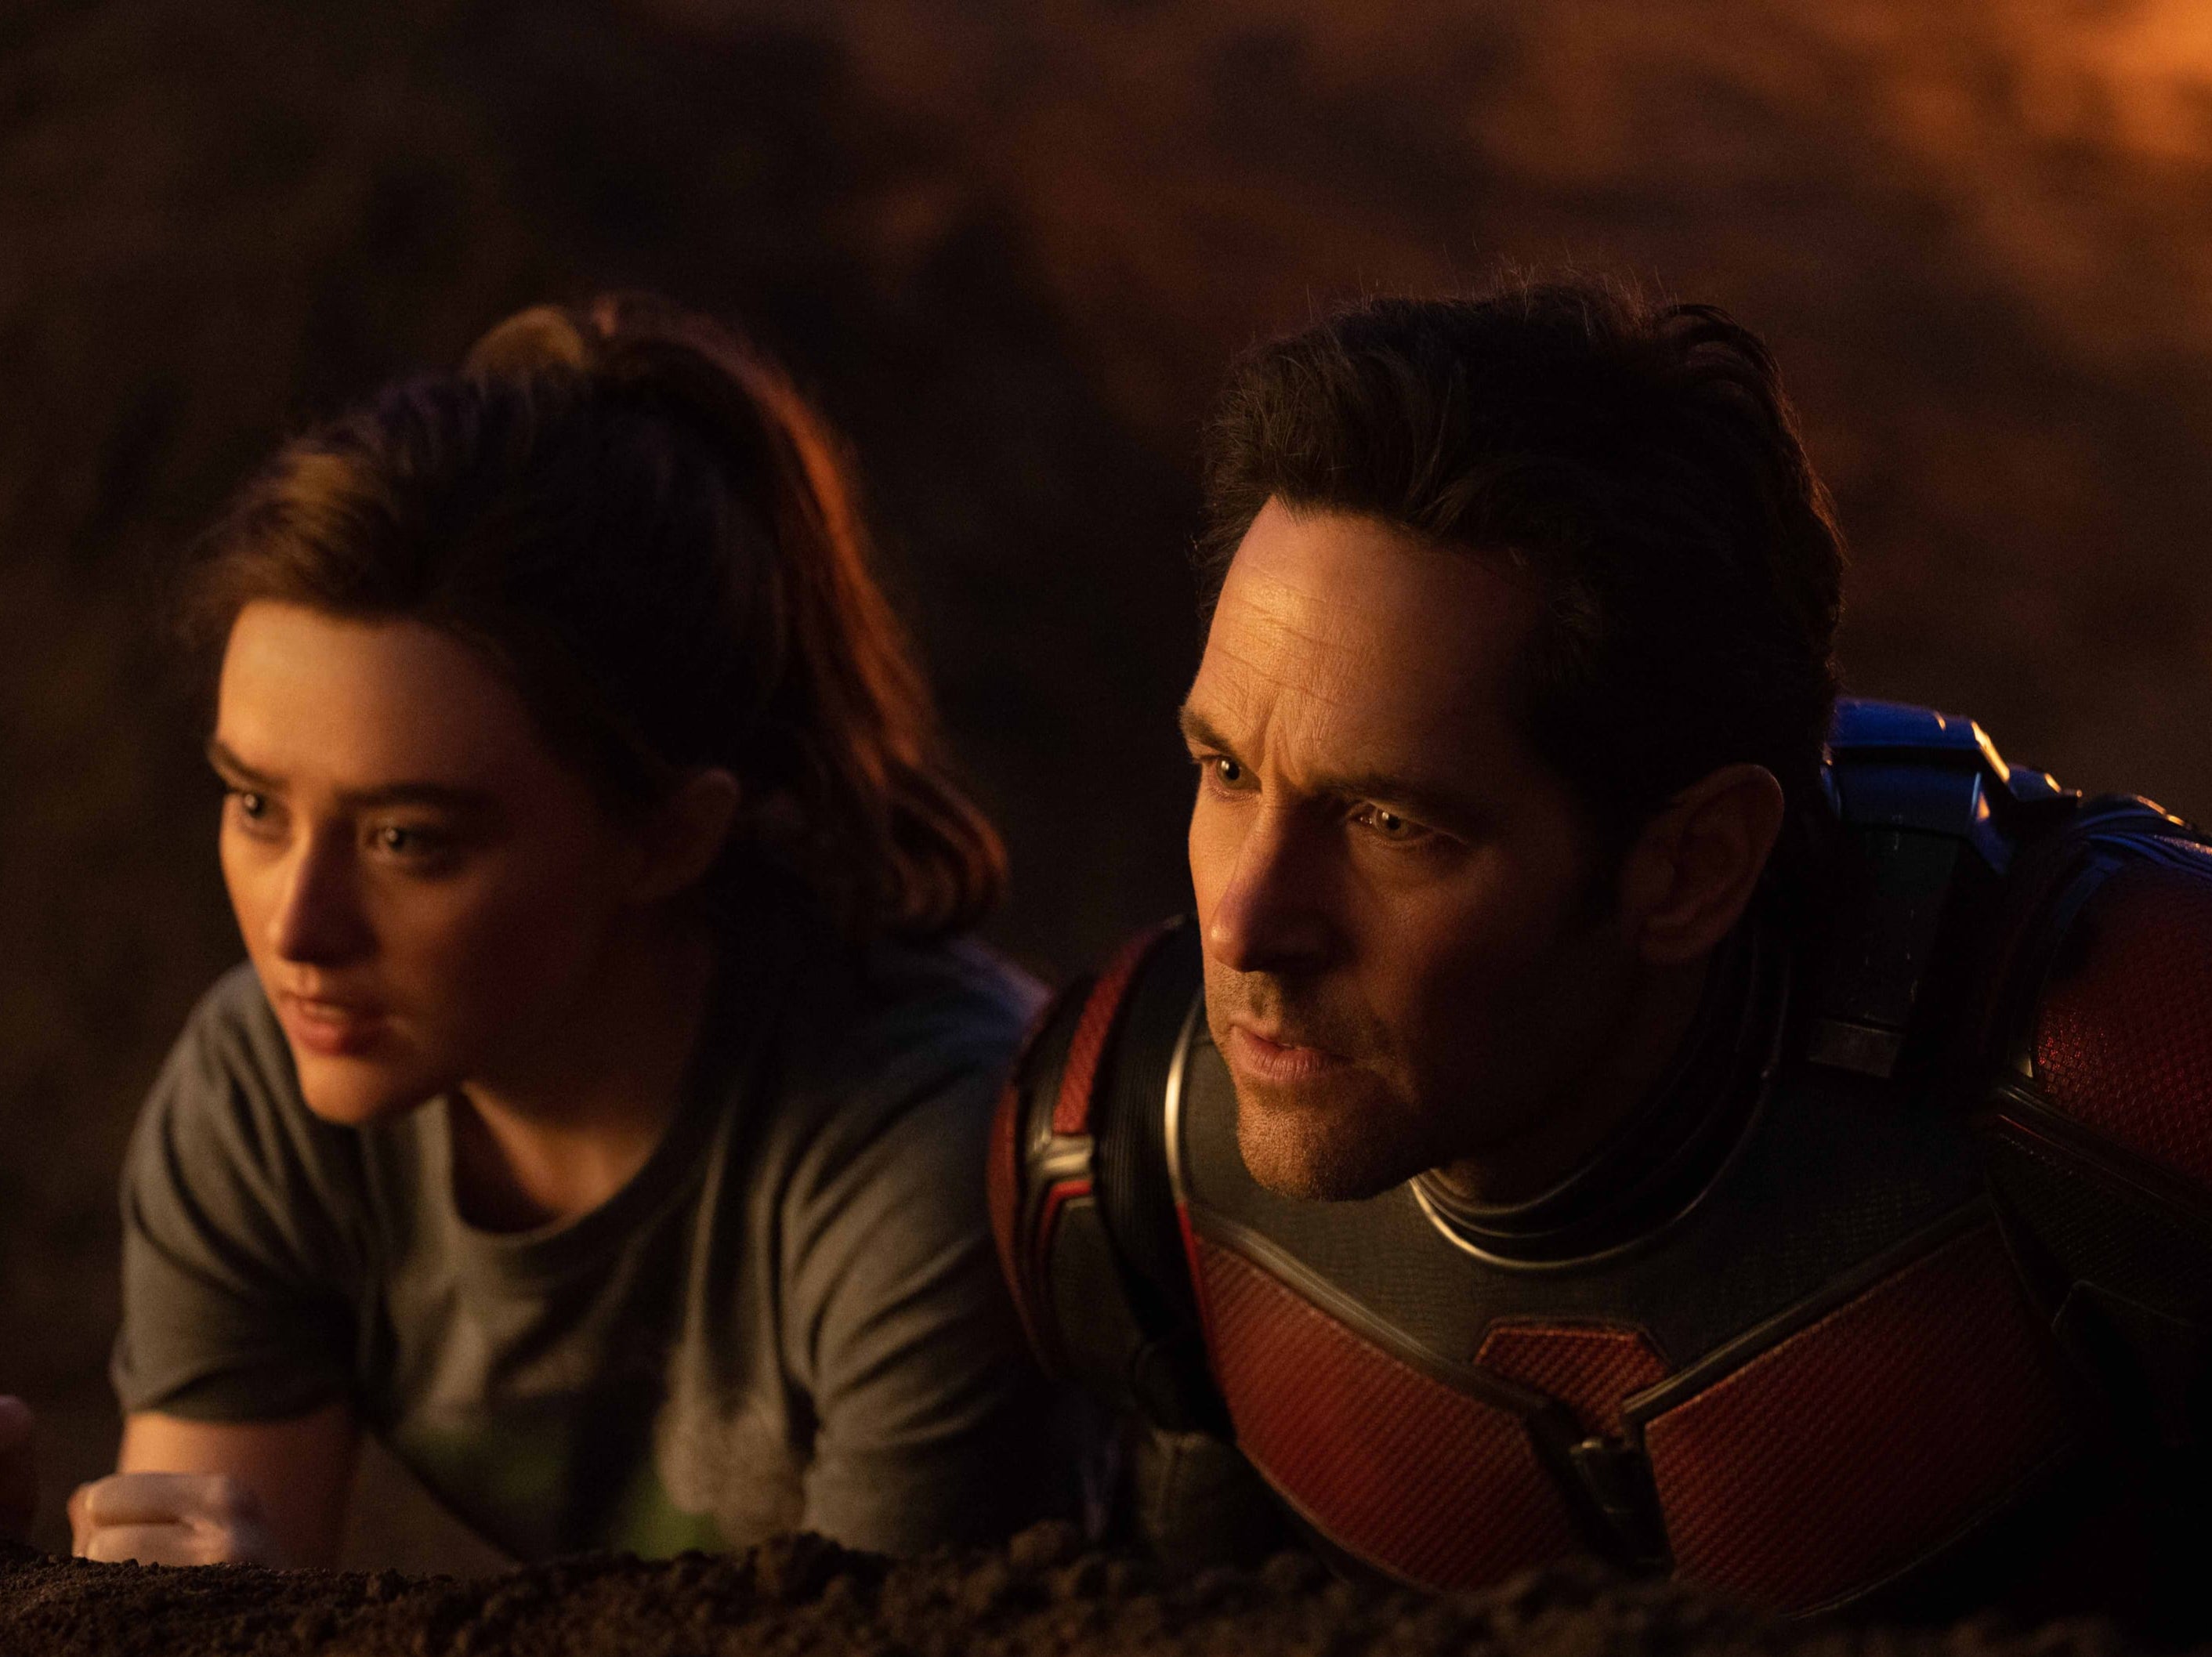 Ant-Man 3 release date, trailer and more about Quantumania